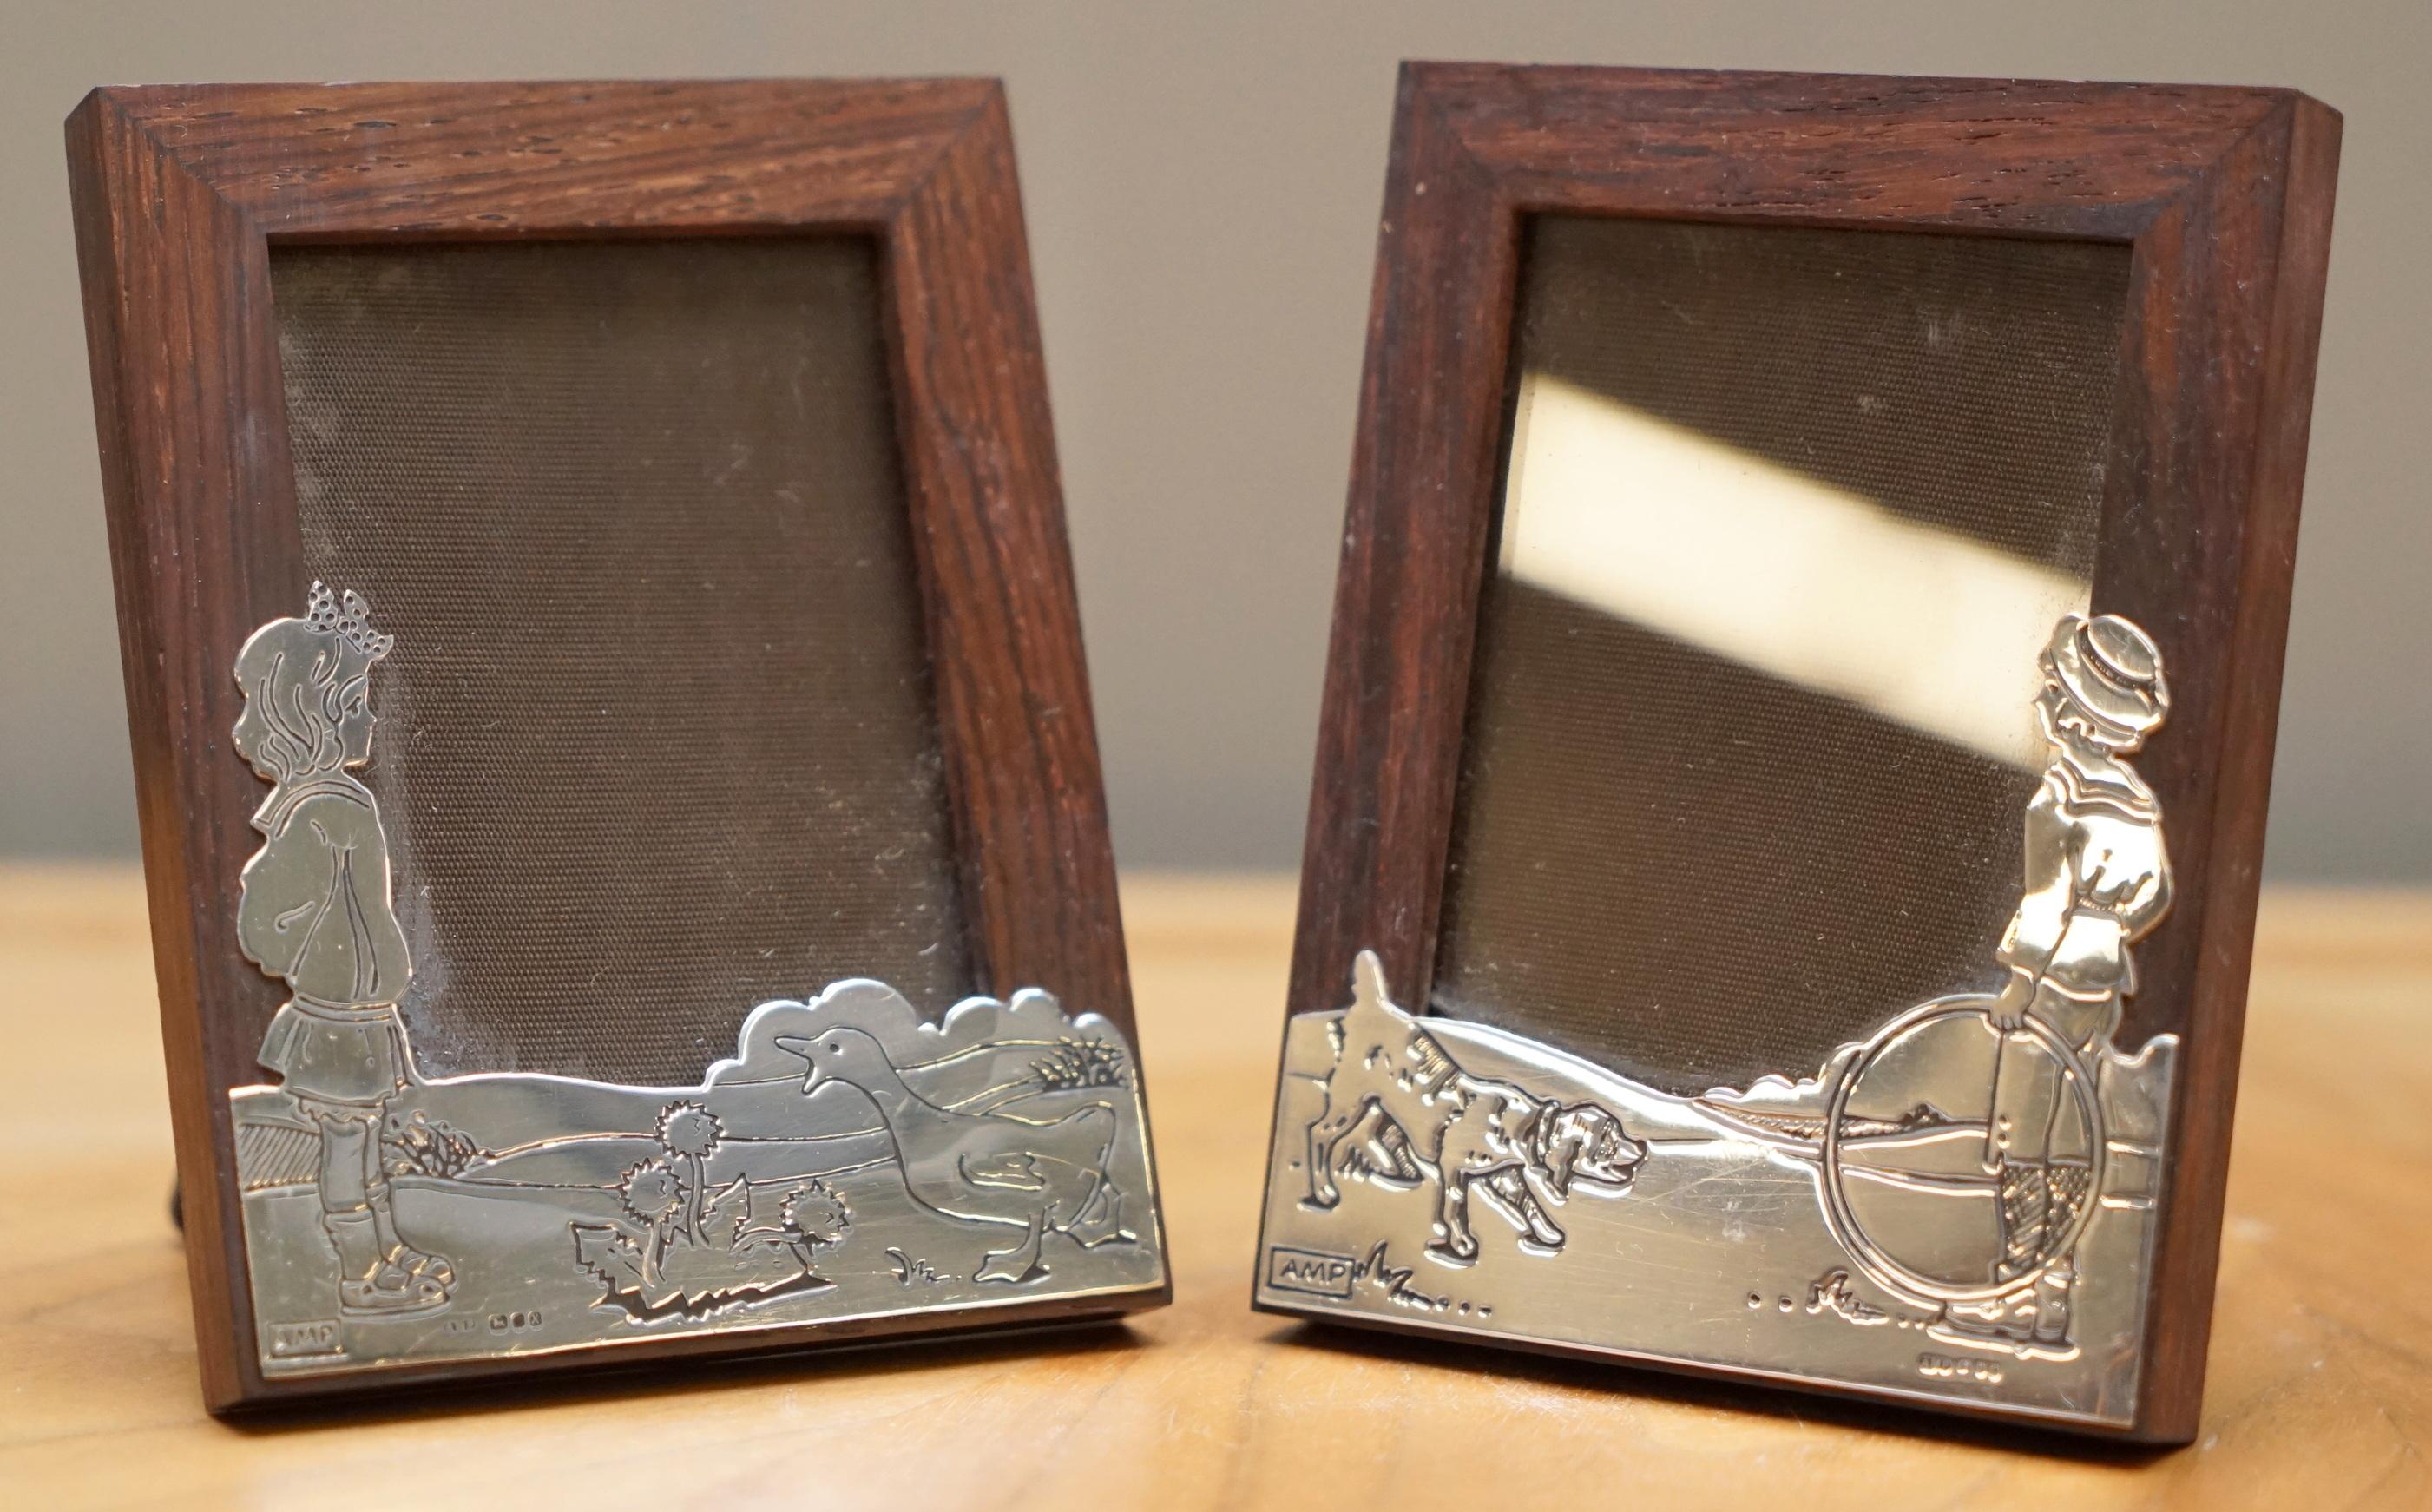 We are delighted to offer for sale this absolutely stunning pair of 1984 fully hallmarked sterling silver Asprey London Children’s picture frames

I have two other much larger Asprey London Art deco picture frames listed under my other